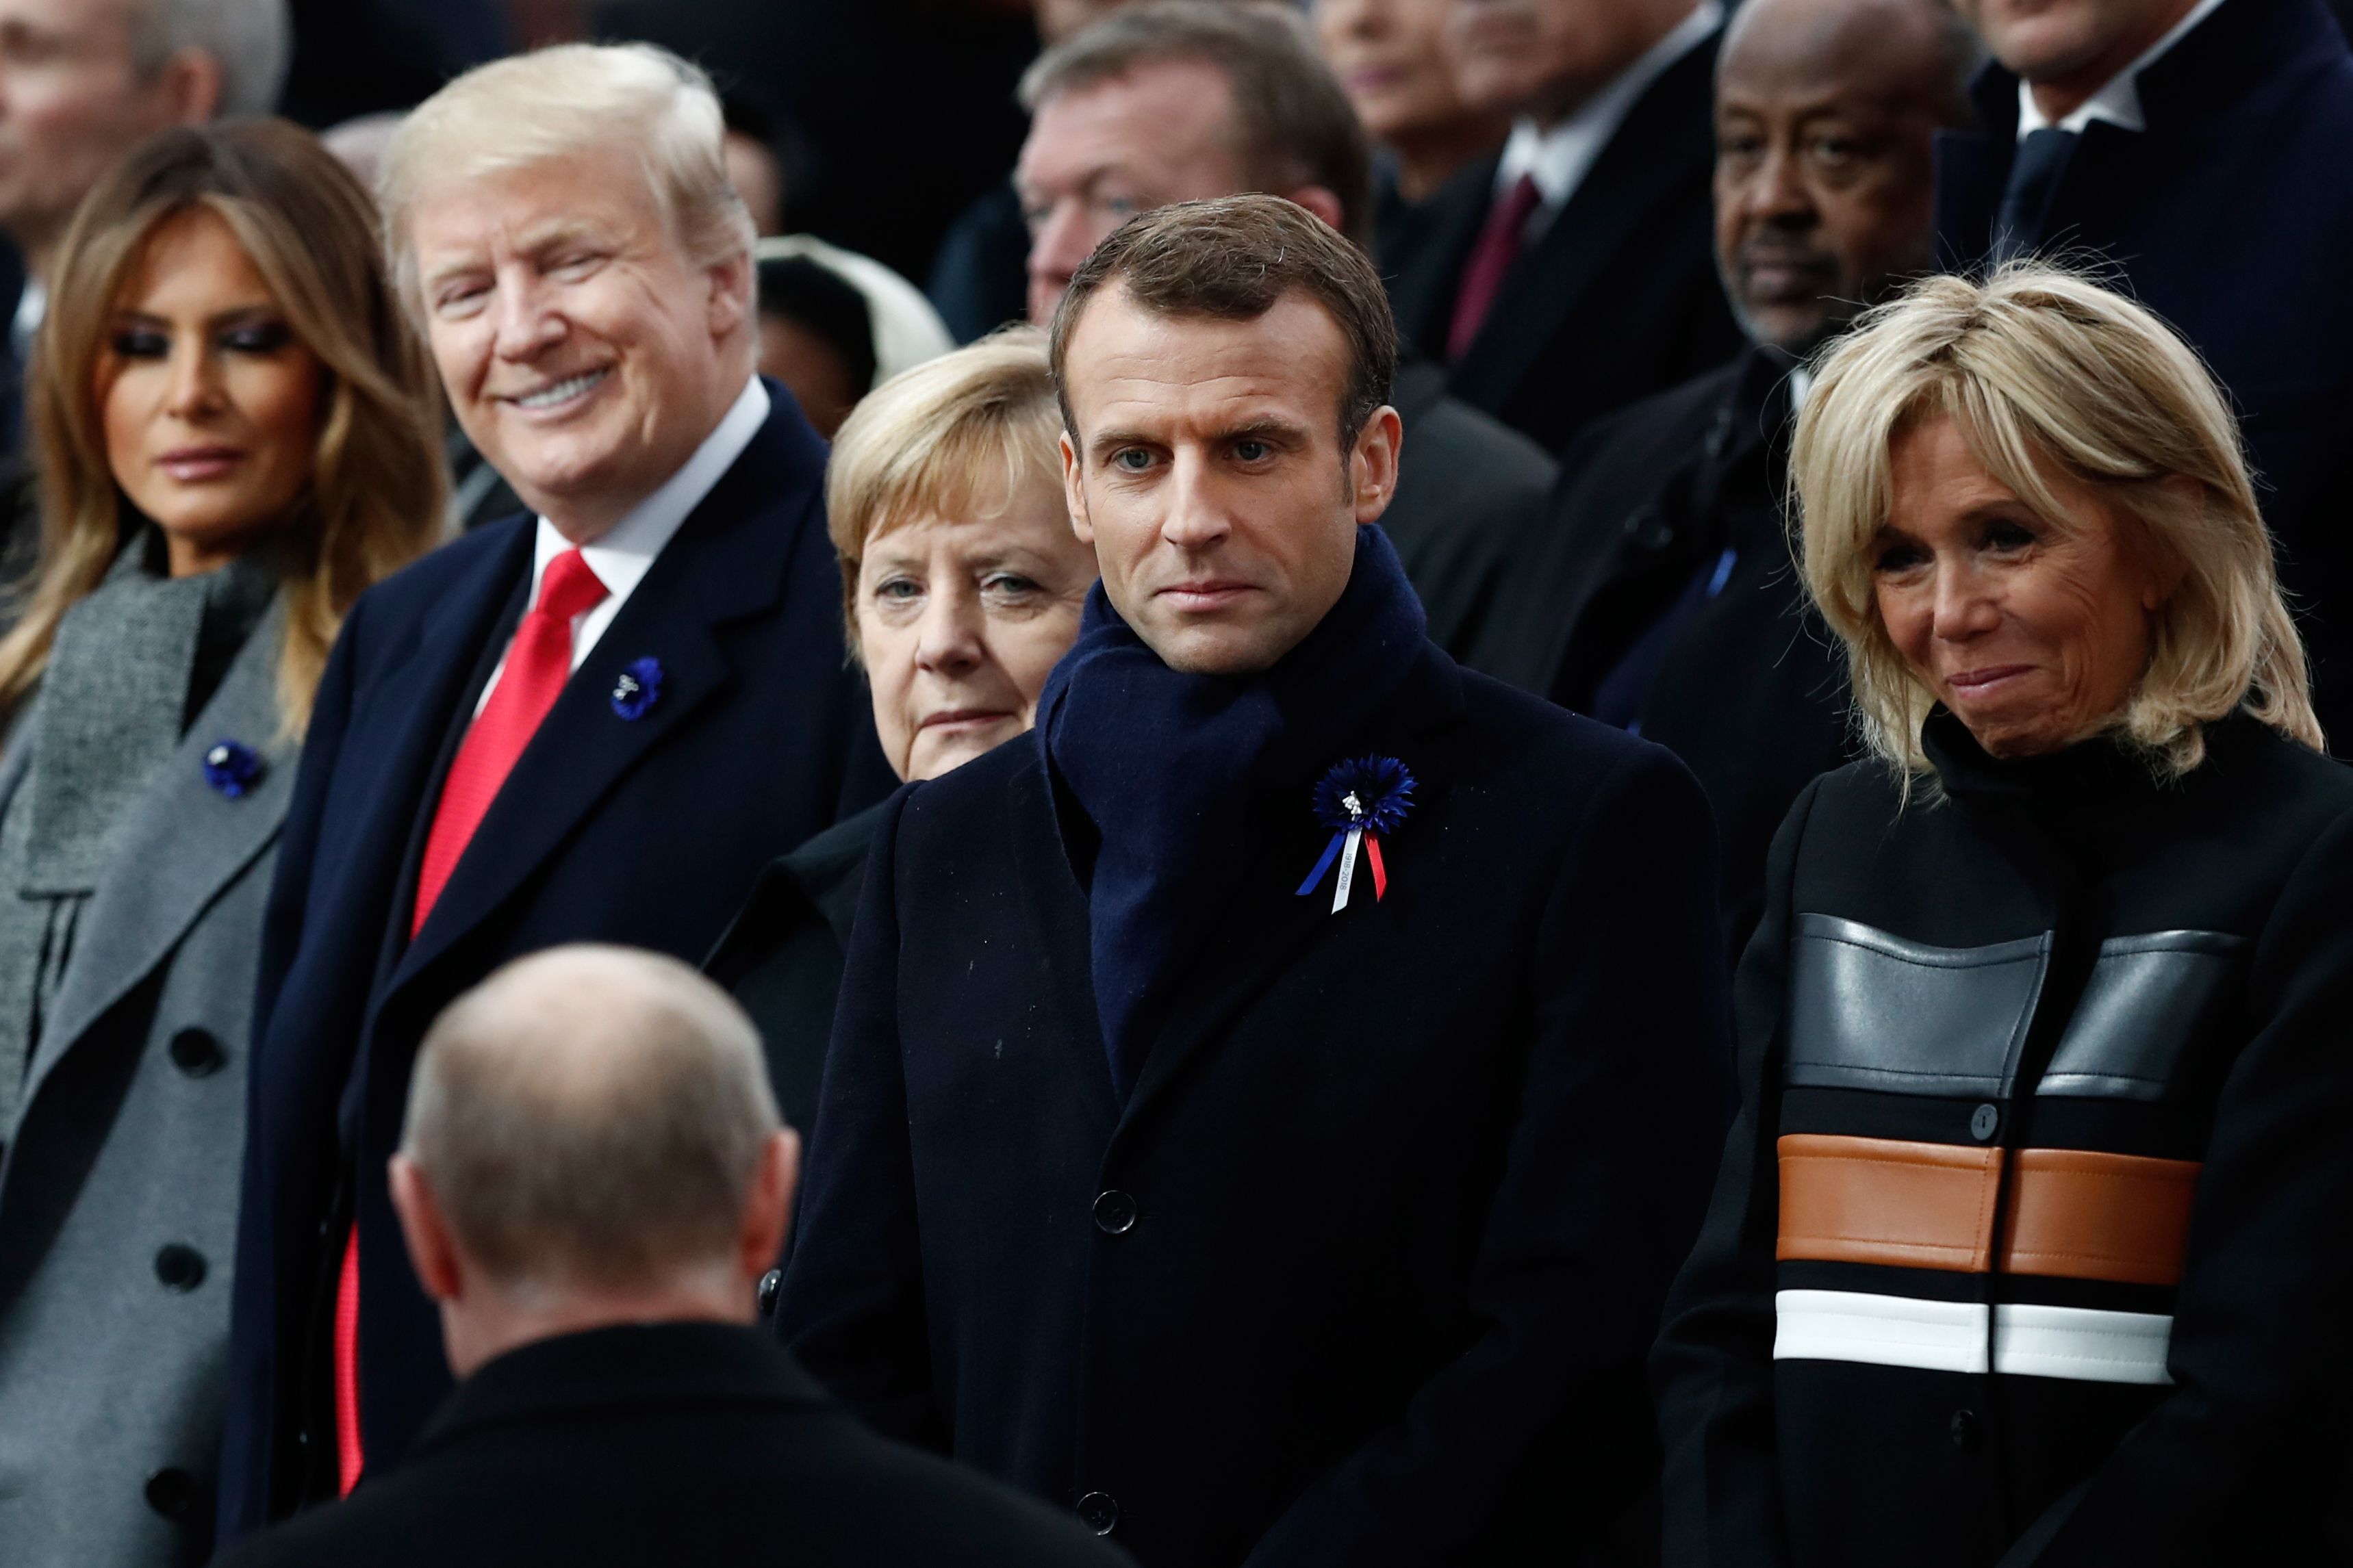 US First Lady Melania Trump, US President Donald Trump, German Chancellor Angela Merkel, French President Emmanuel Macron and French President's wife Brigitte Macron react as Russian President Vladimir Putin (front C) arrives to attend a ceremony at the Arc de Triomphe in Paris on November 11, 2018. (Getty Images)